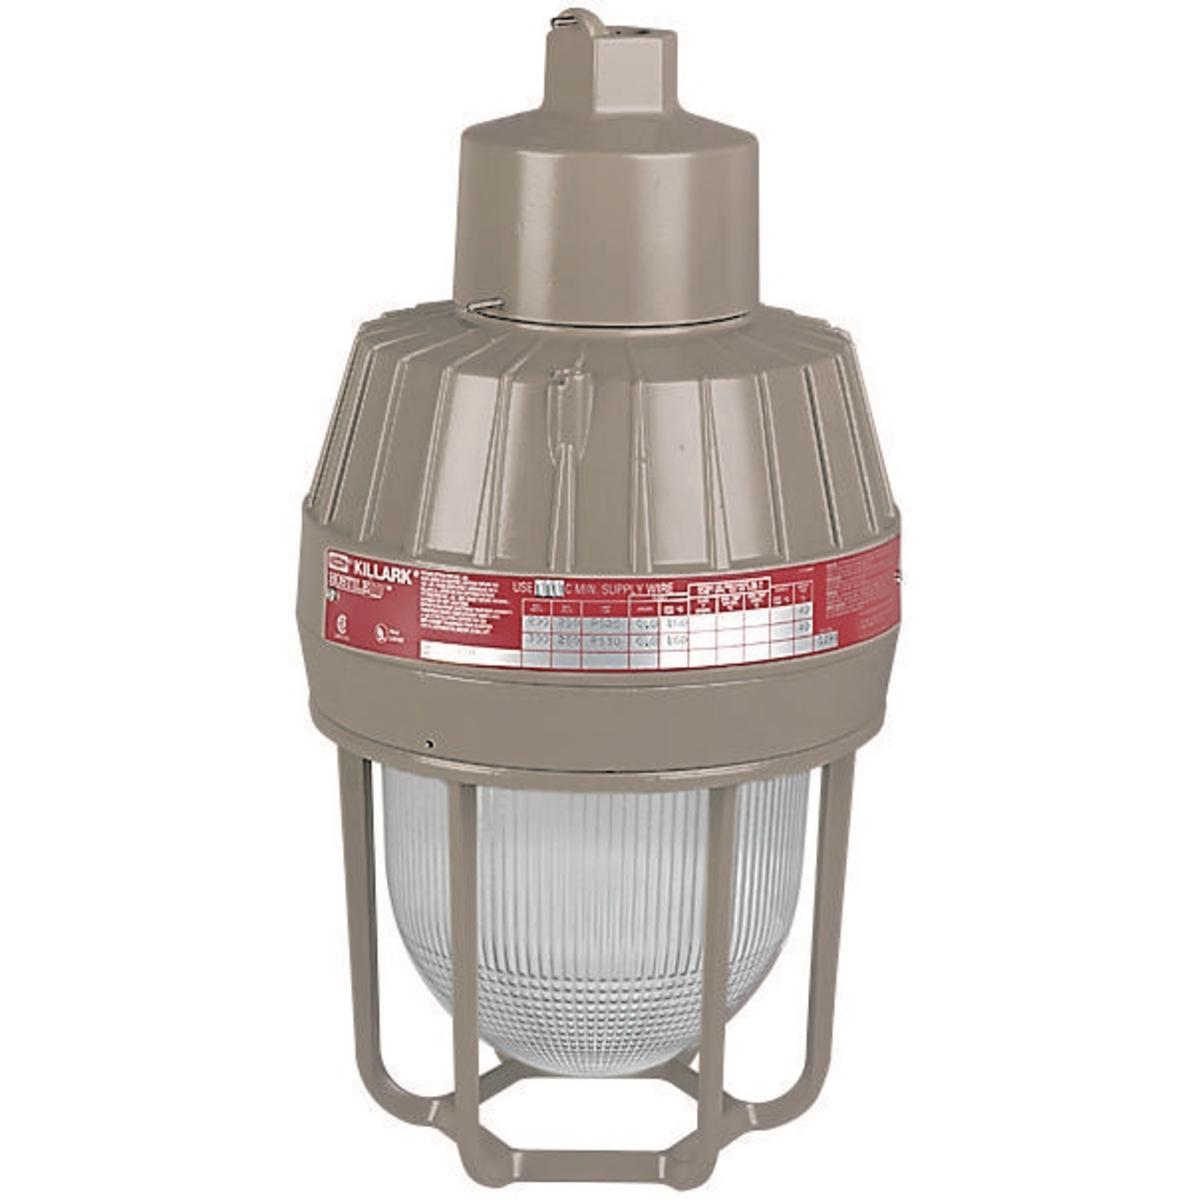 Hubbell EMI15A1 SU-100 Incandescent 150W 1/2" Pendant Special  ; Four light sources—Incandescent, compact fluorescent, high pressure sodium and metal halide ; Mounting choice—Pendant, ceiling, 25˚ stanchion or 90˚ wall mount, all with “wireless” design that allows fast, easy fi